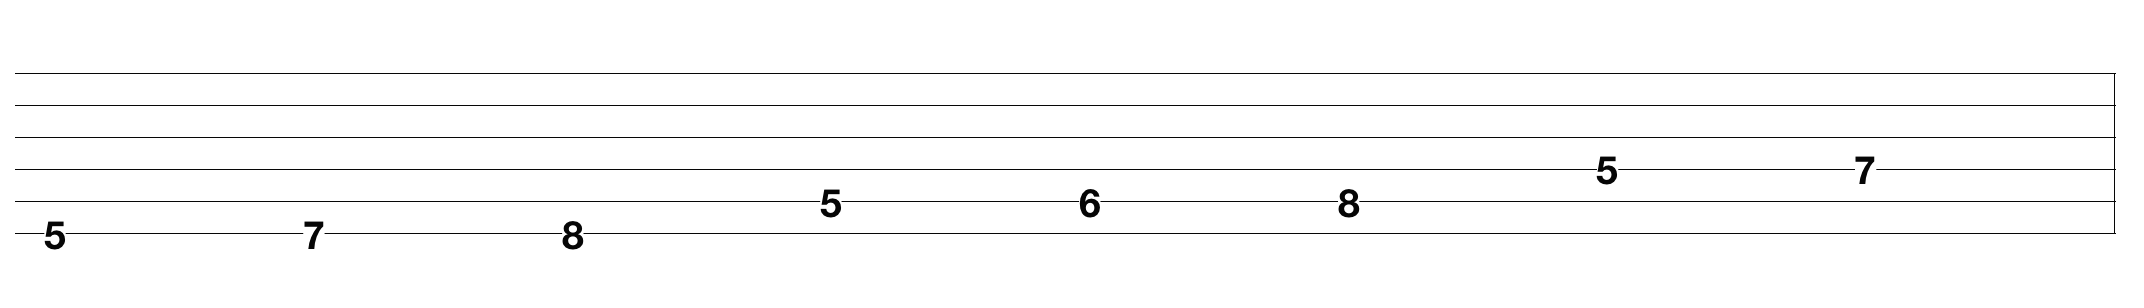 melodic-guitar-scales_6.png